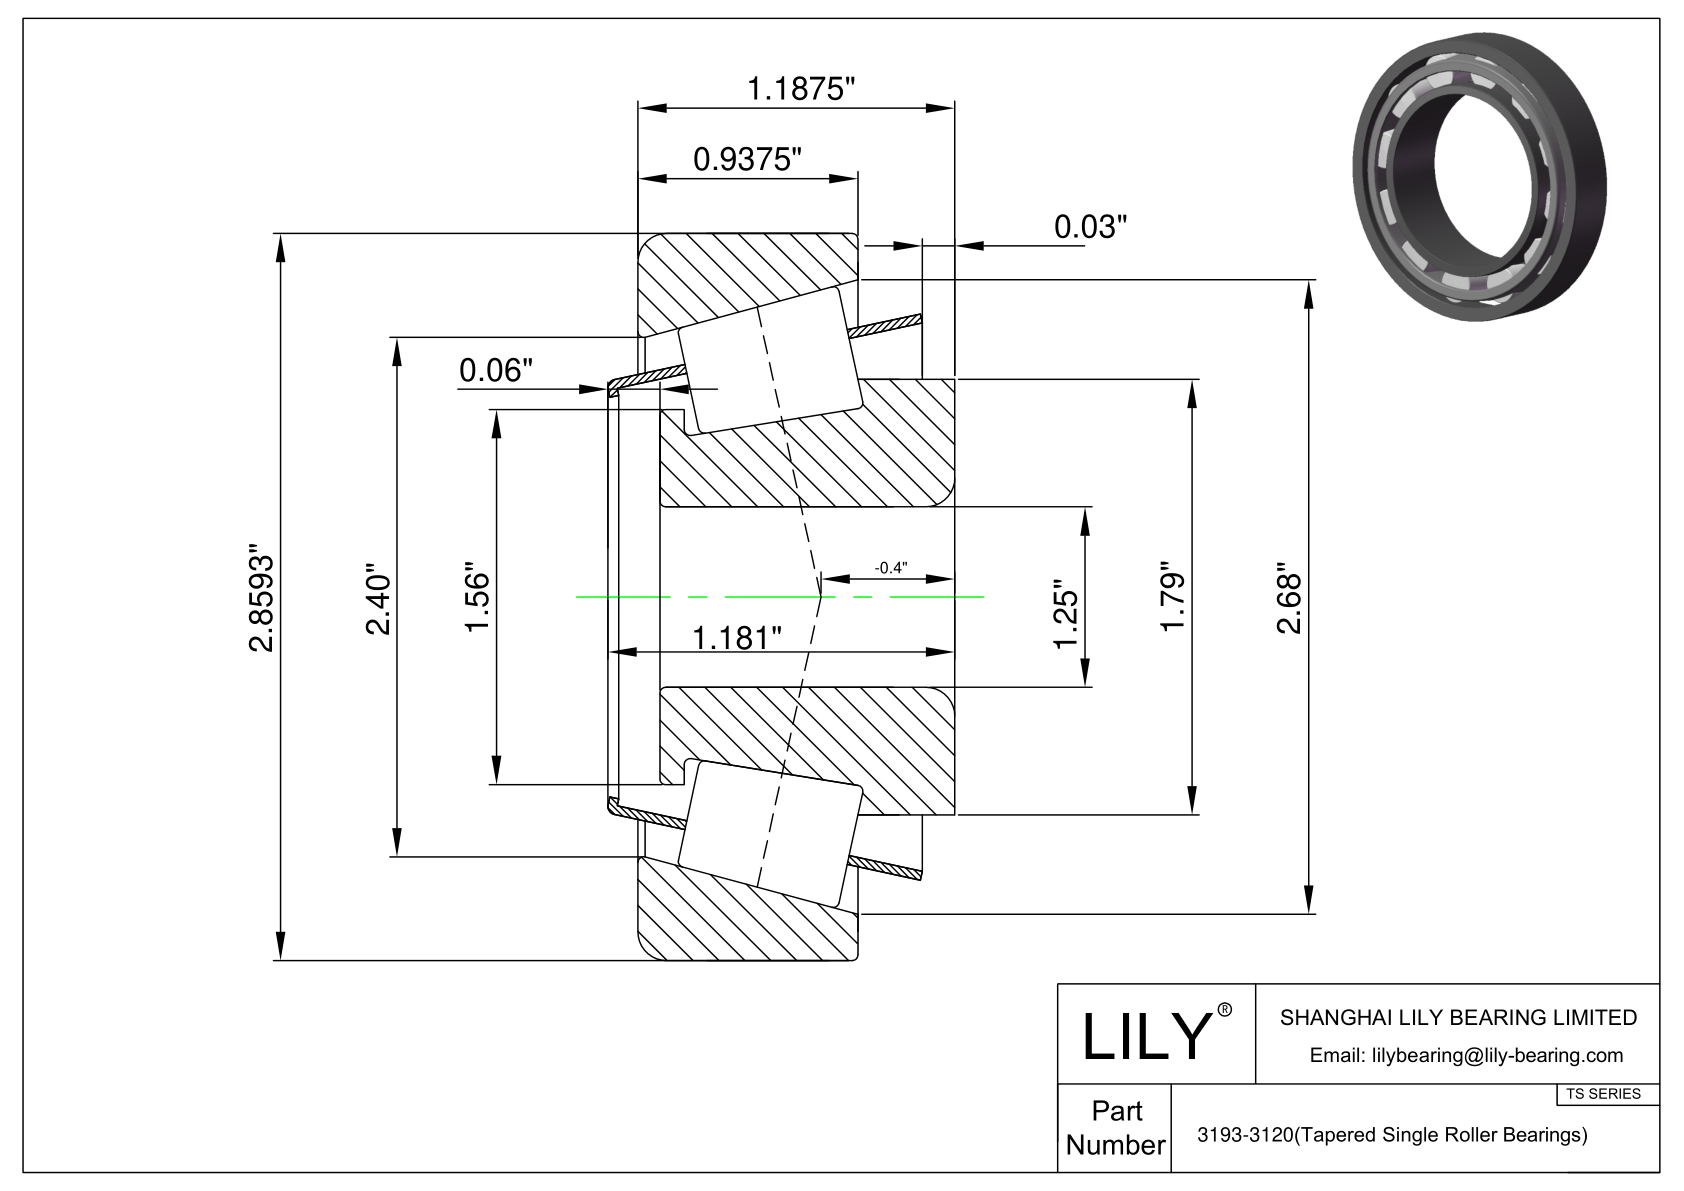 3193-3120 TS (Tapered Single Roller Bearings) (Imperial) cad drawing